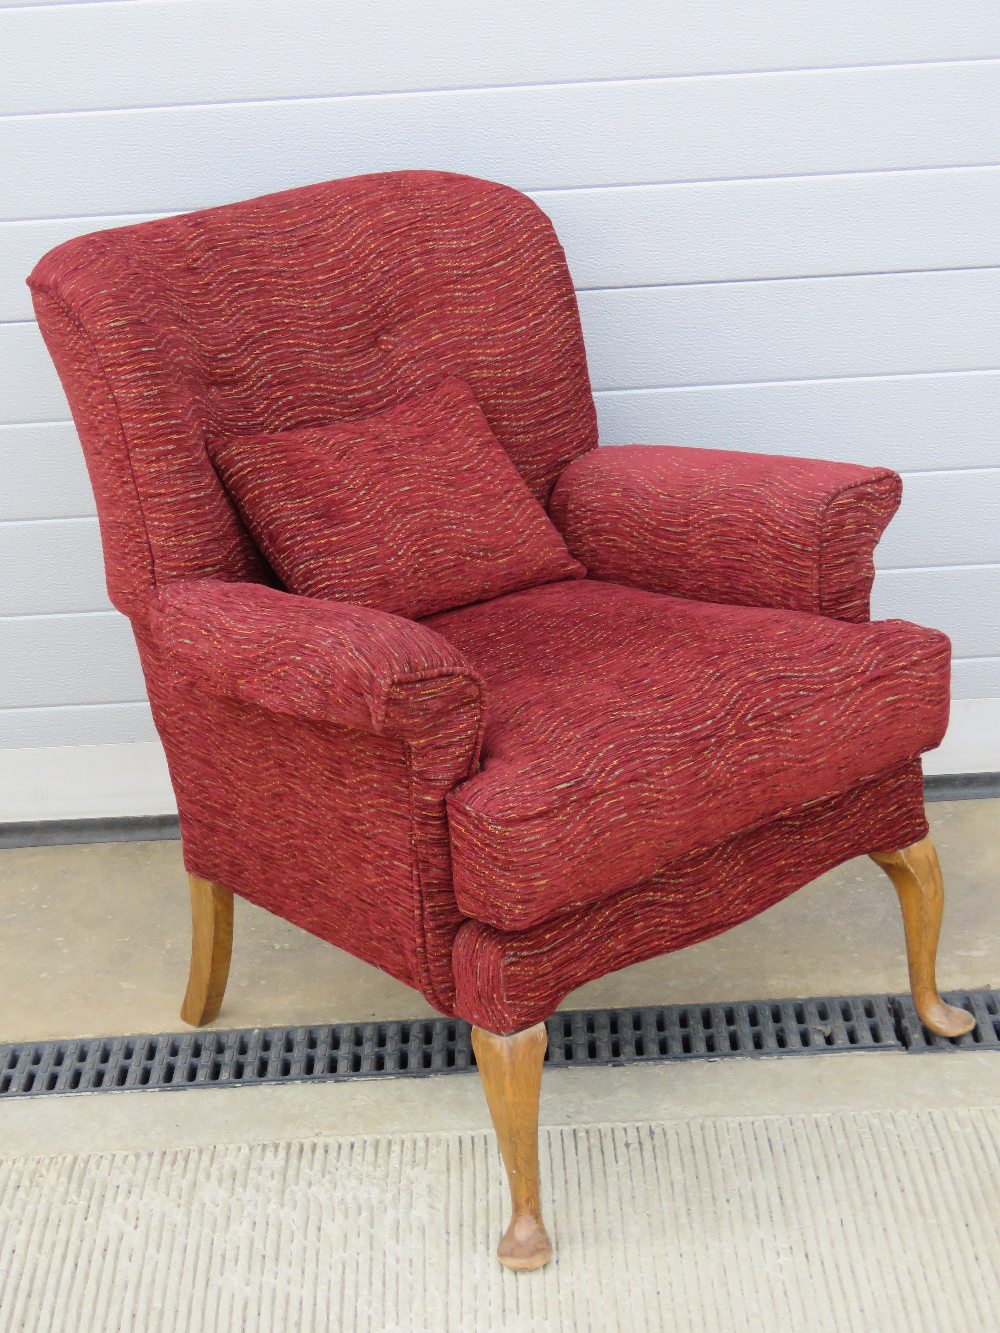 A vintage arm chair re-upholstered in contemporary red fabric, with cushion,